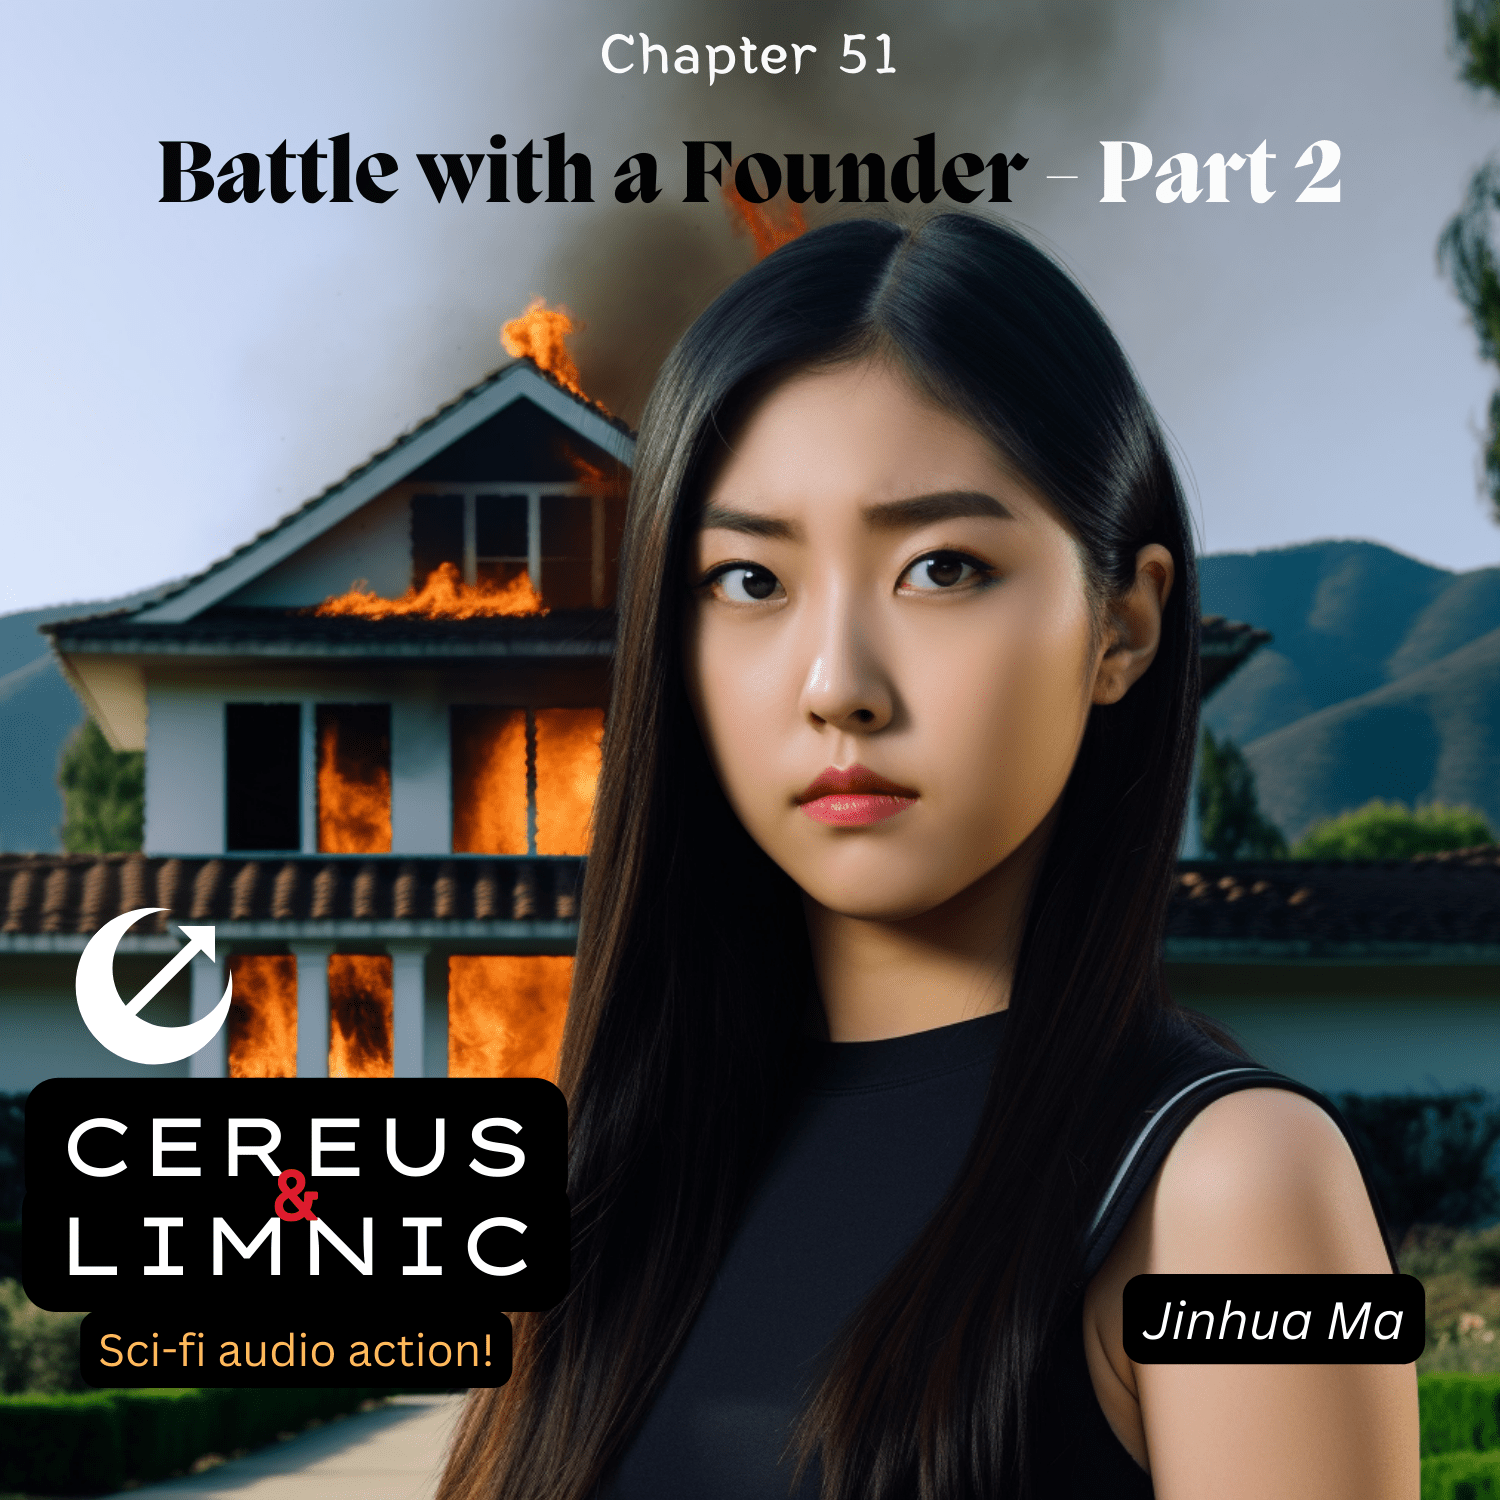 Chapter 51: Battle with a Founder - Part 2